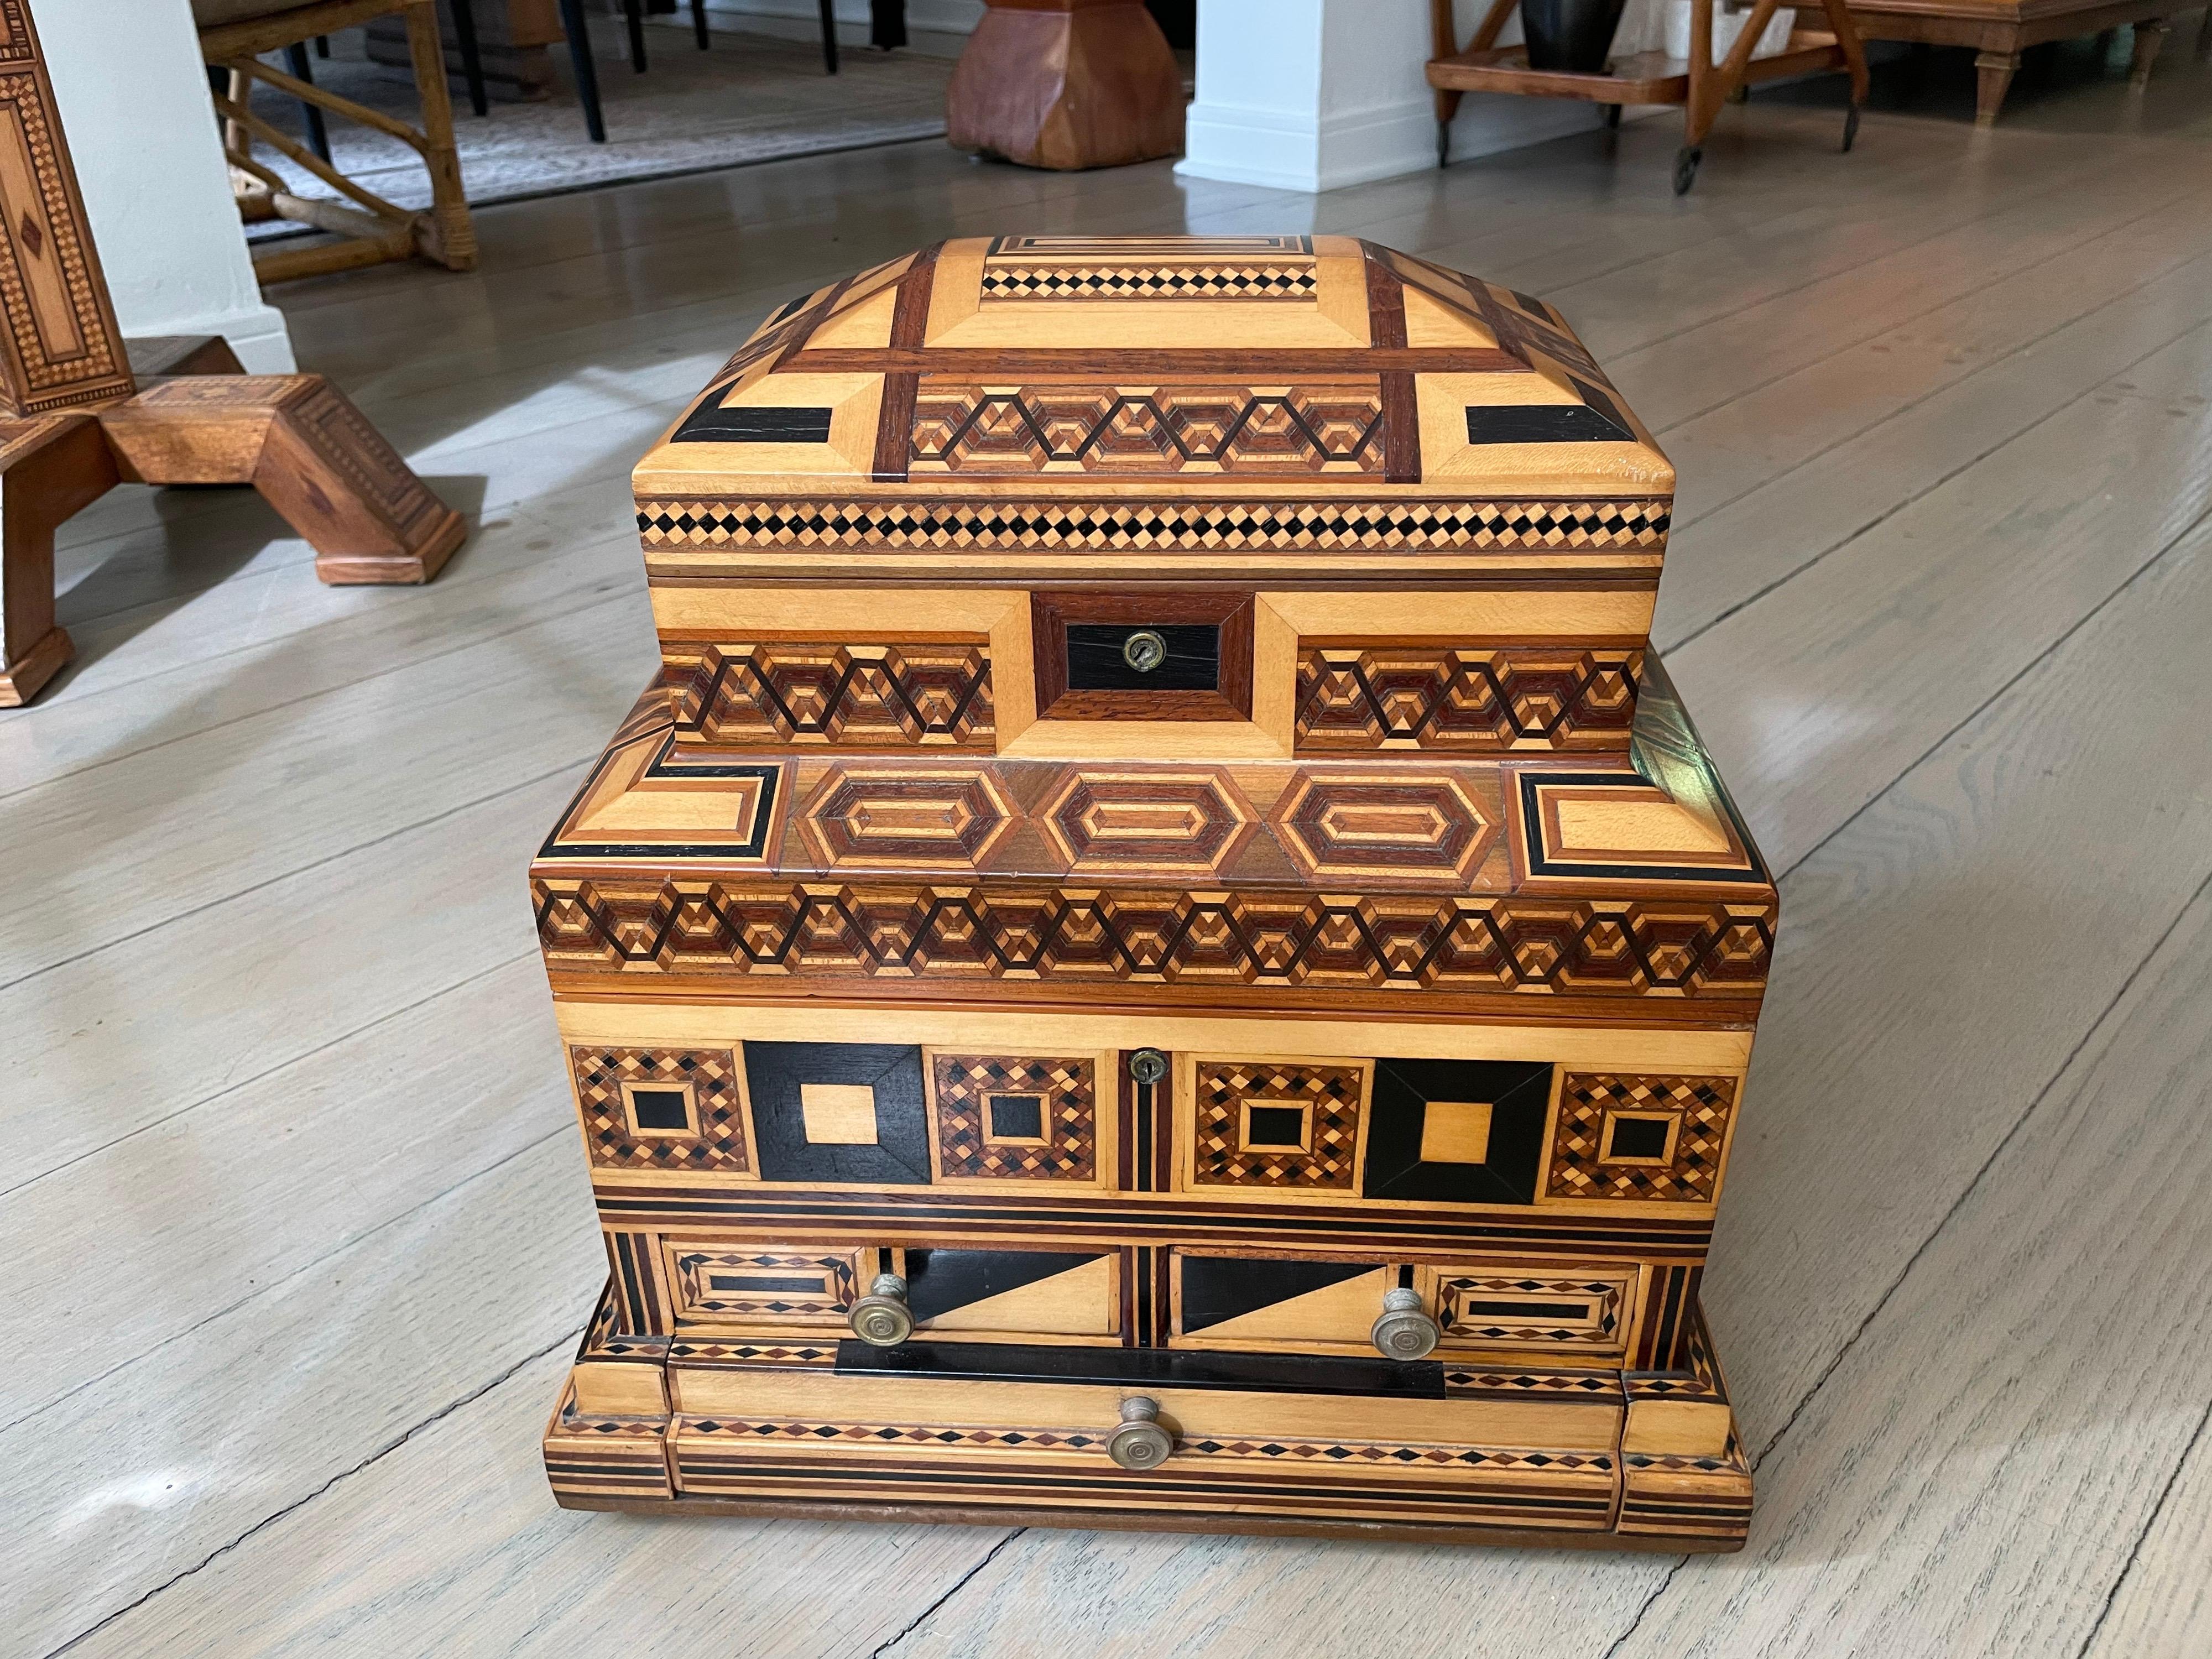 This handcrafted tiered box has two levels and 3 lined drawers. Geometric shapes and designs all-over show the detail and beauty of this box. The second tier of the box shows a hand painted reverse-painted glass of a landscape (see detail images).